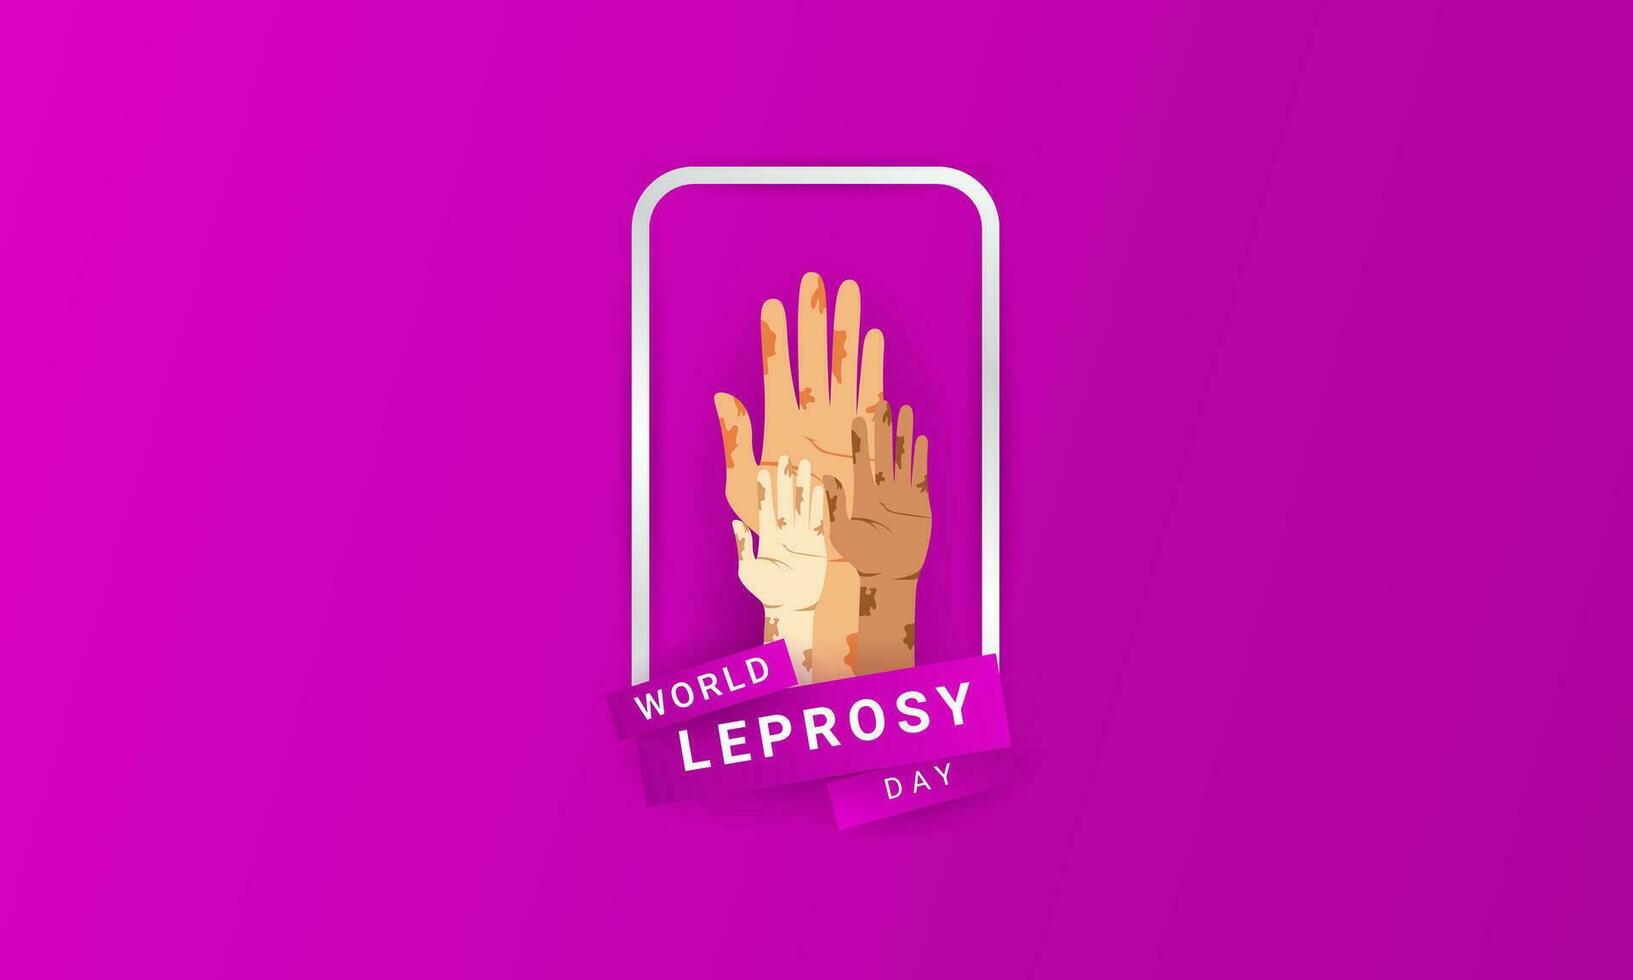 World Leprosy day background is purple in color with a modern design style vector